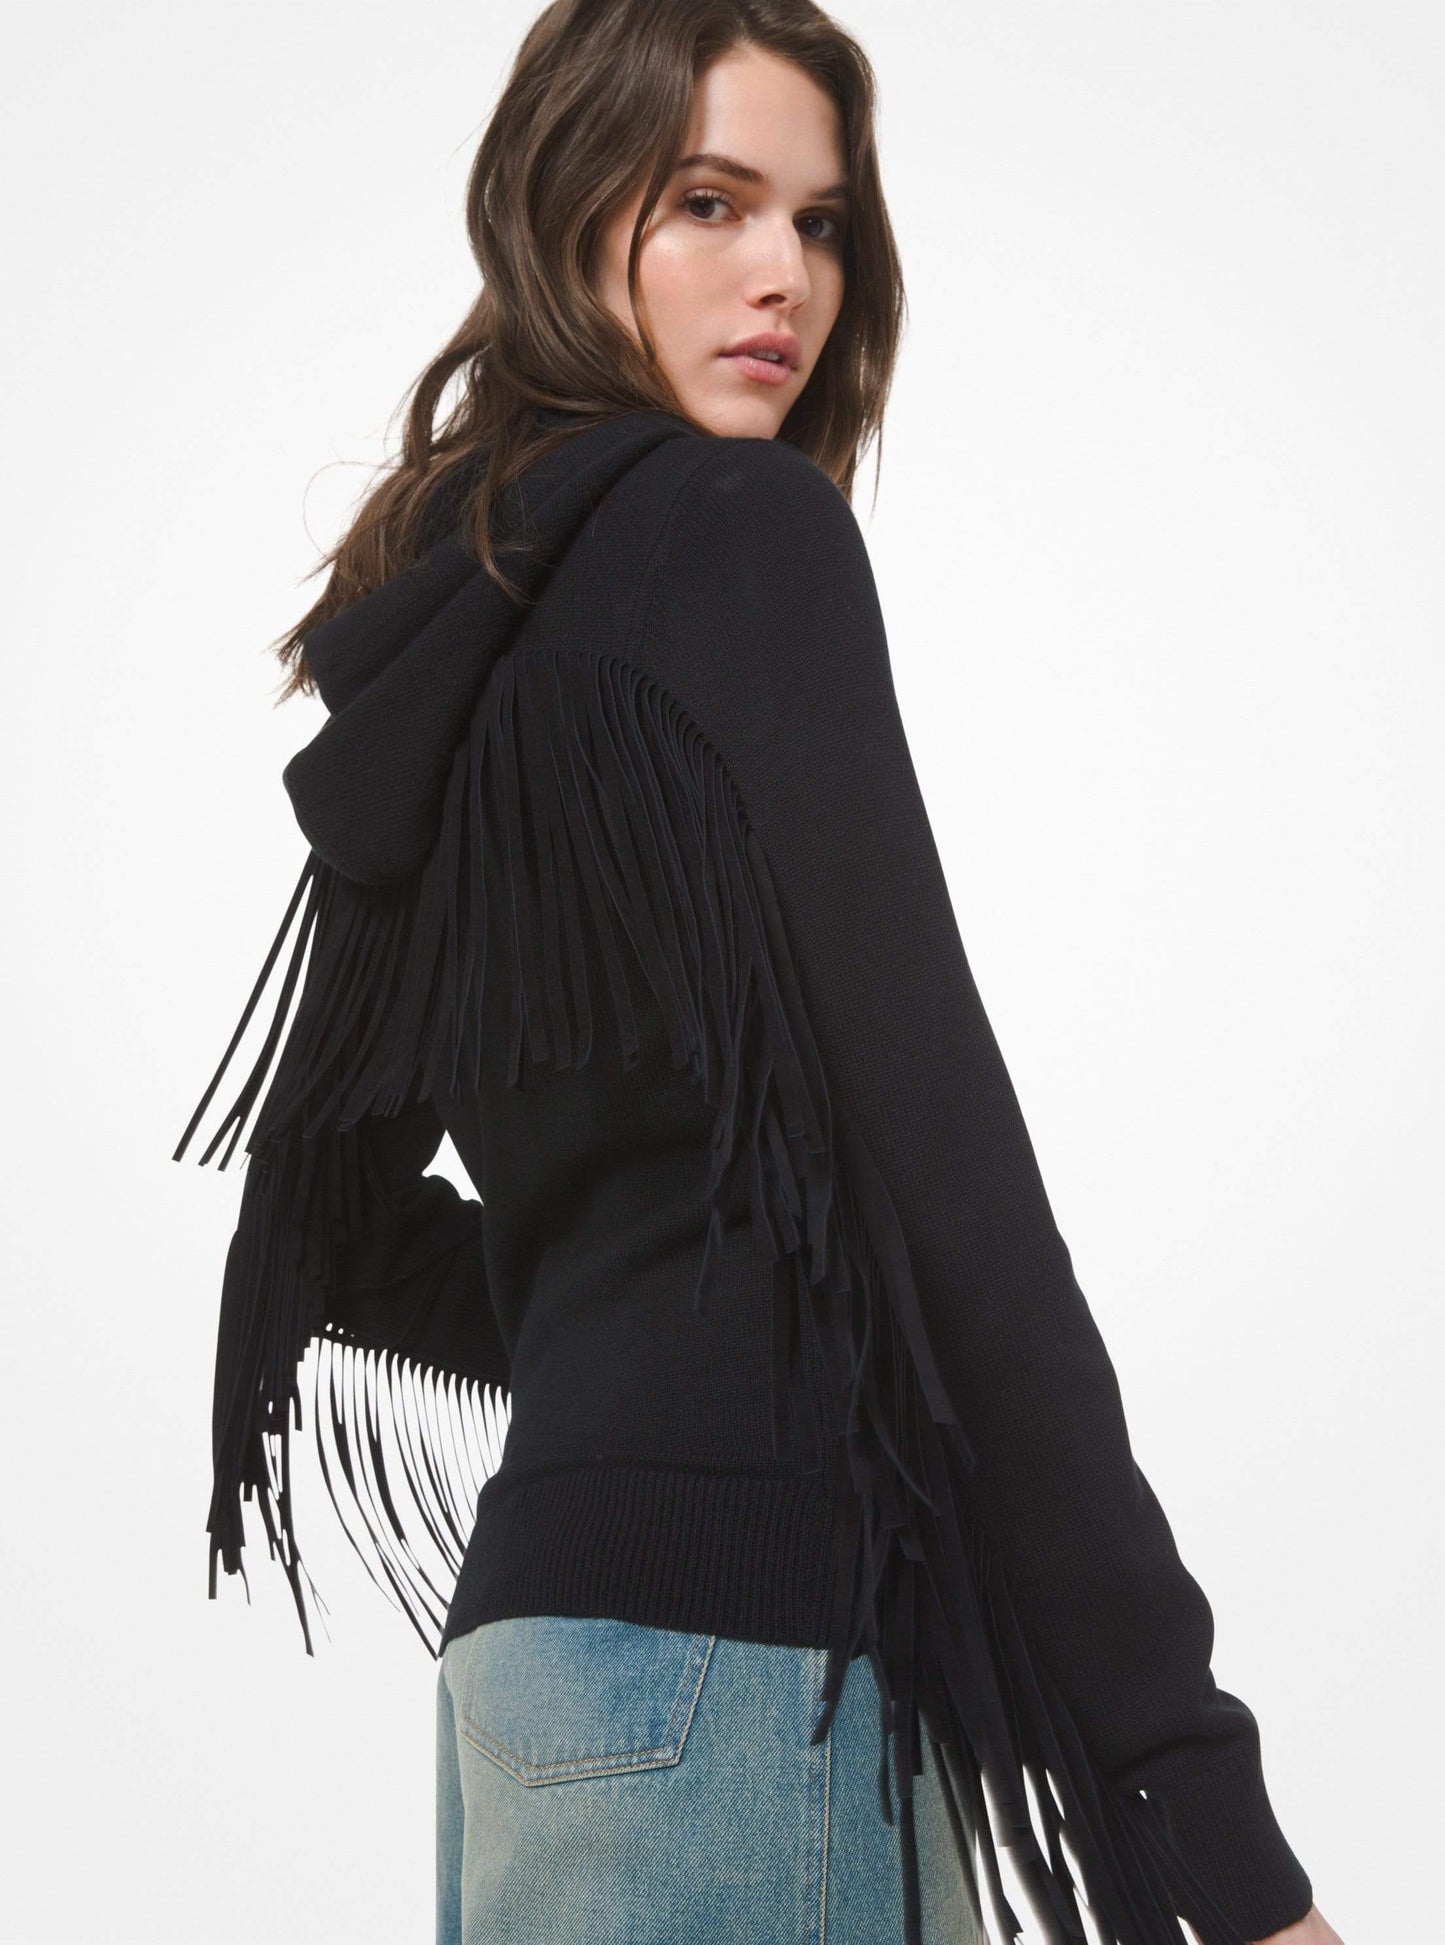 MICHAEL KORS-Black Cashmere and Suede Fringe Hoodie-